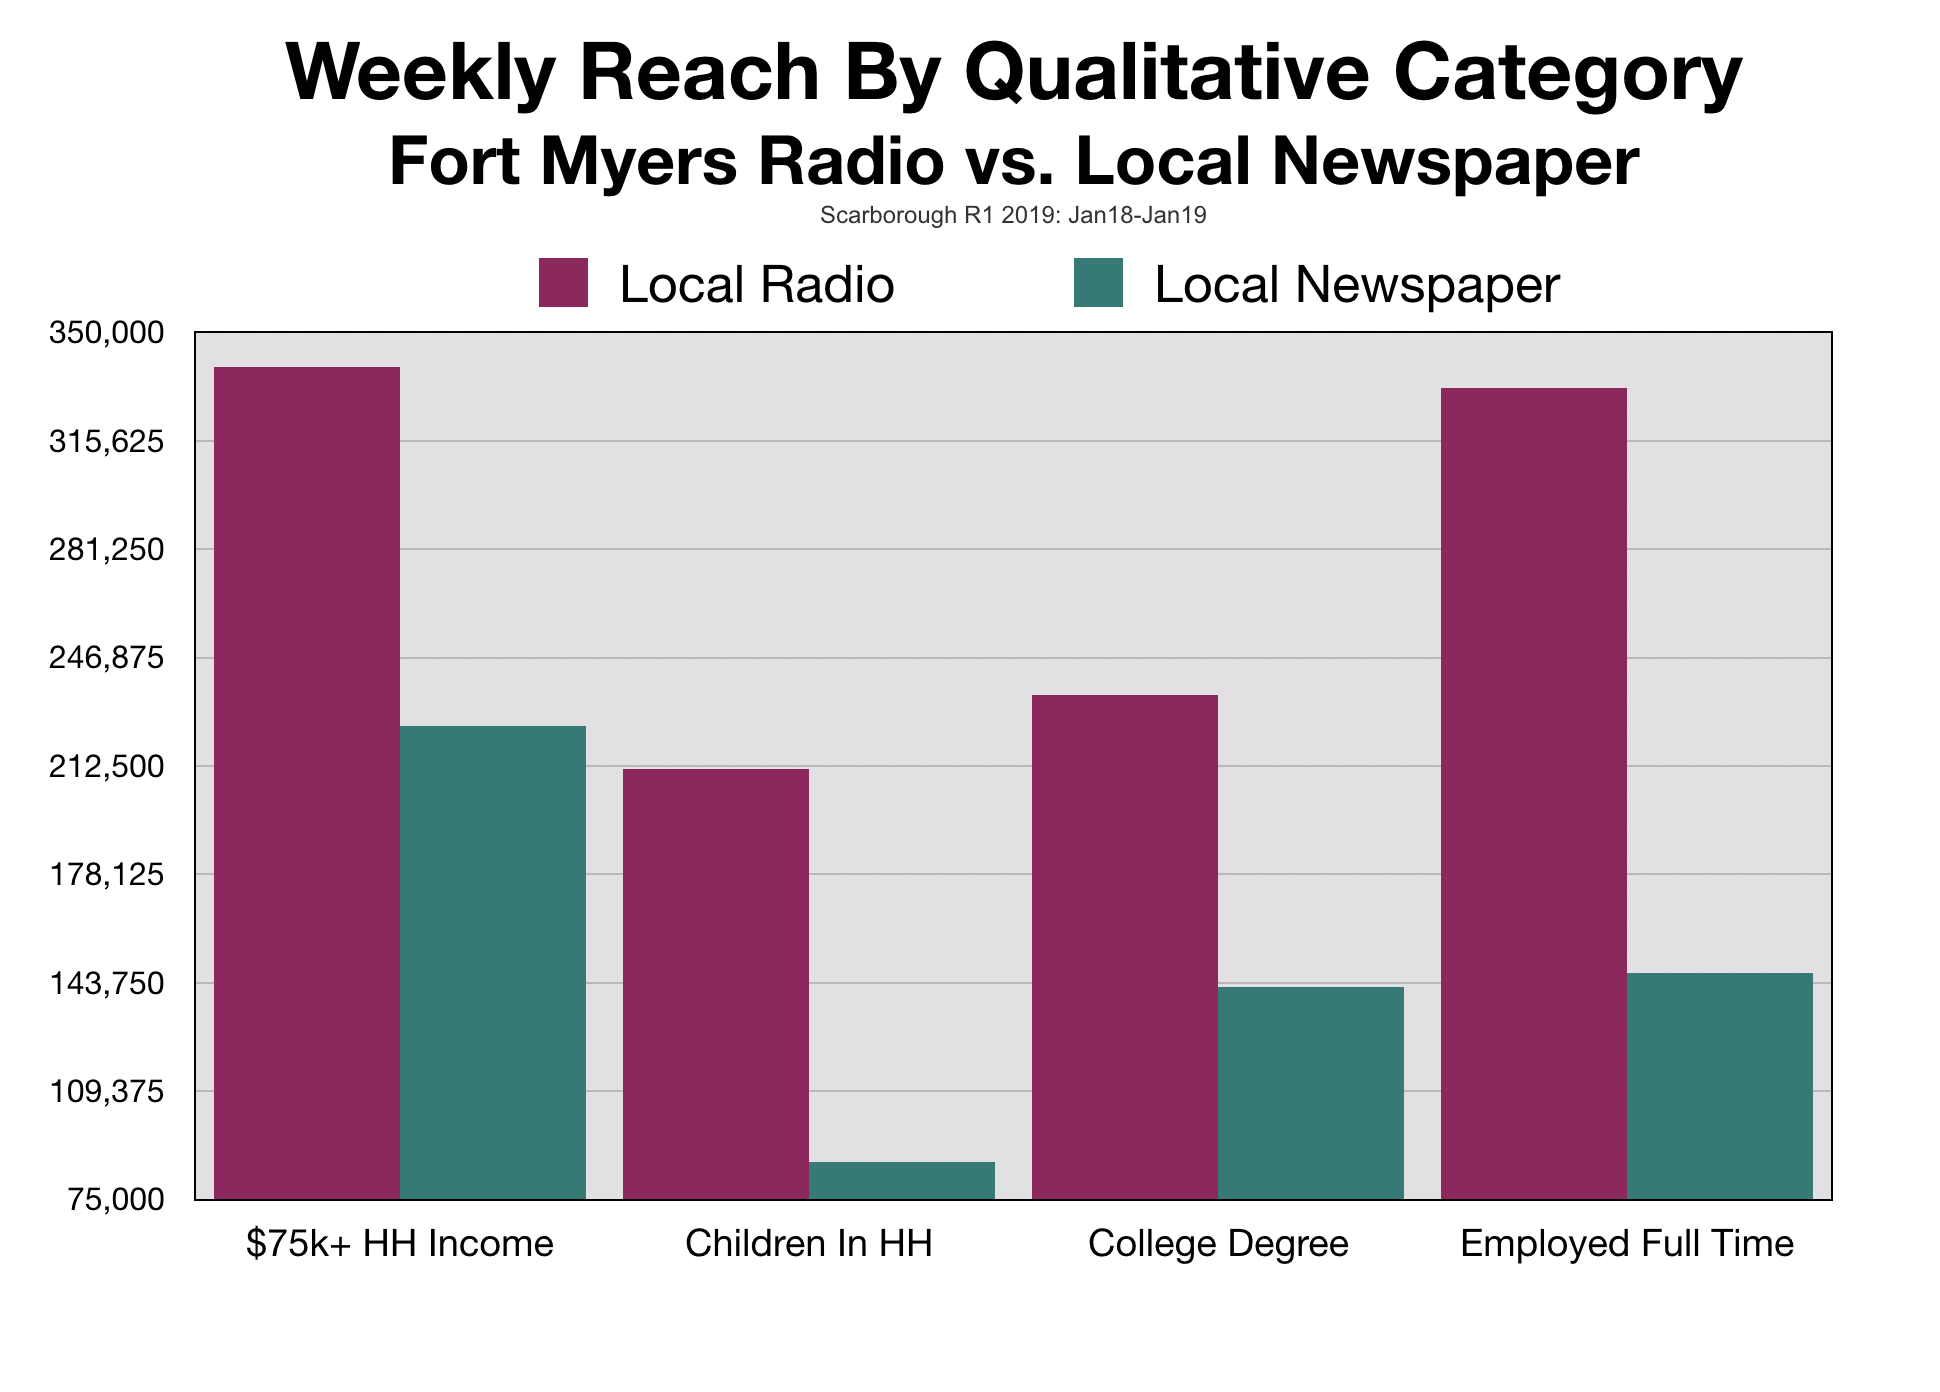 Newspaper Advertising in Southwest Florida Audience Qualitative